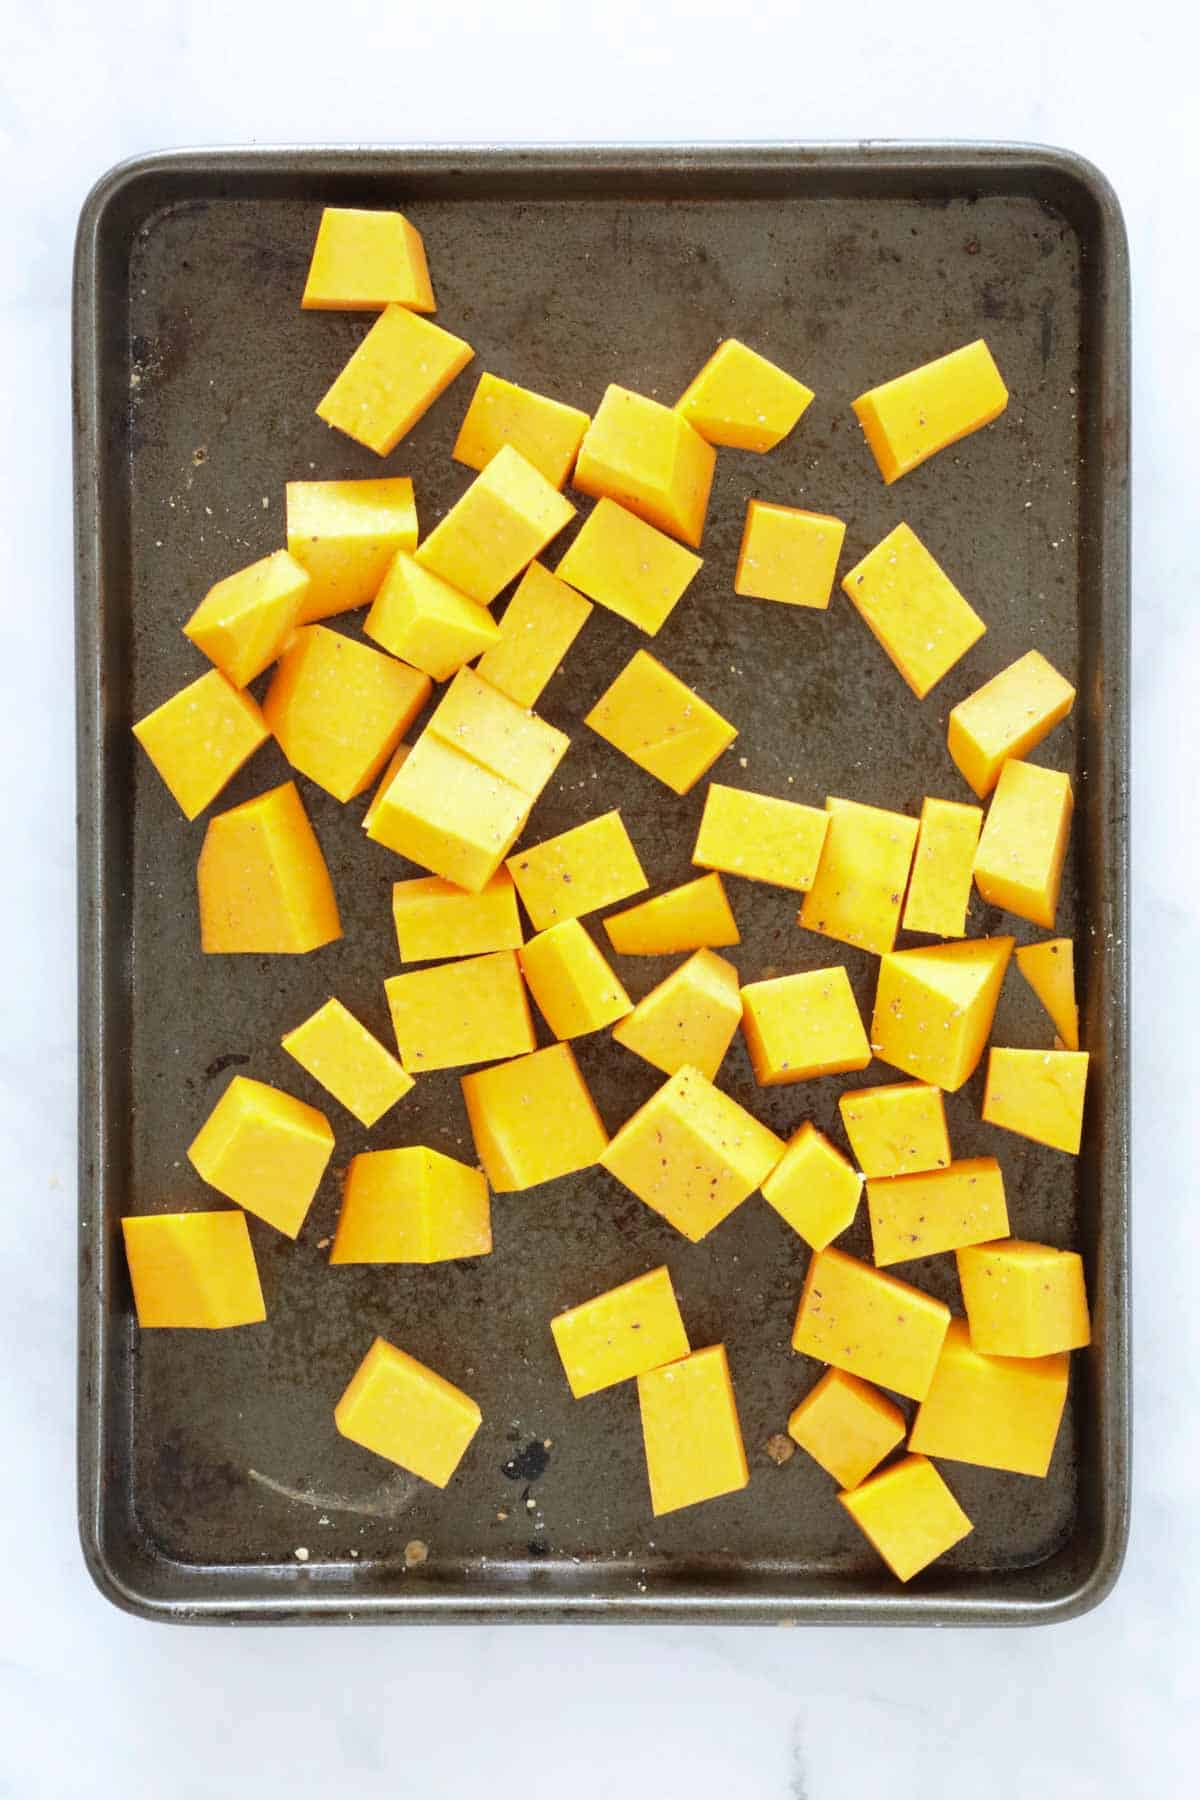 Cubes of pumpkin on a baking tray drizzled with oil, salt and pepper ready to roast.